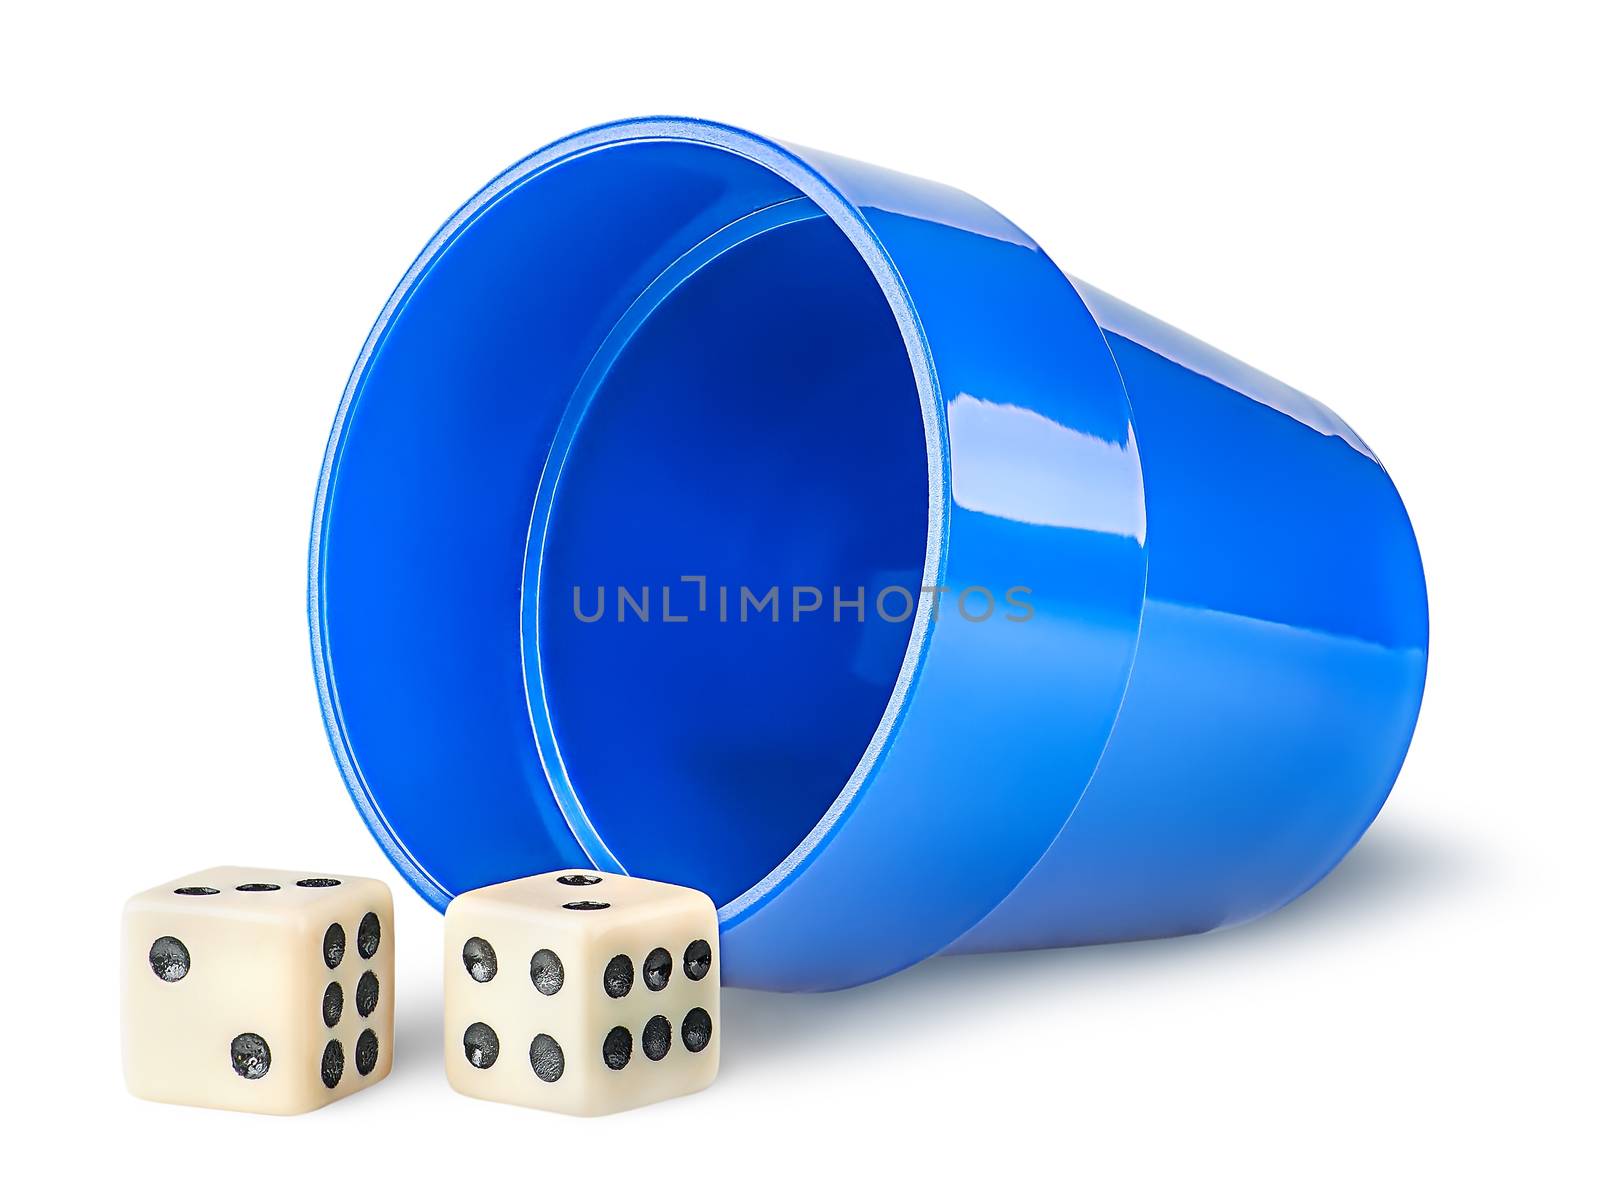 Gaming dice and cup isolated on white background